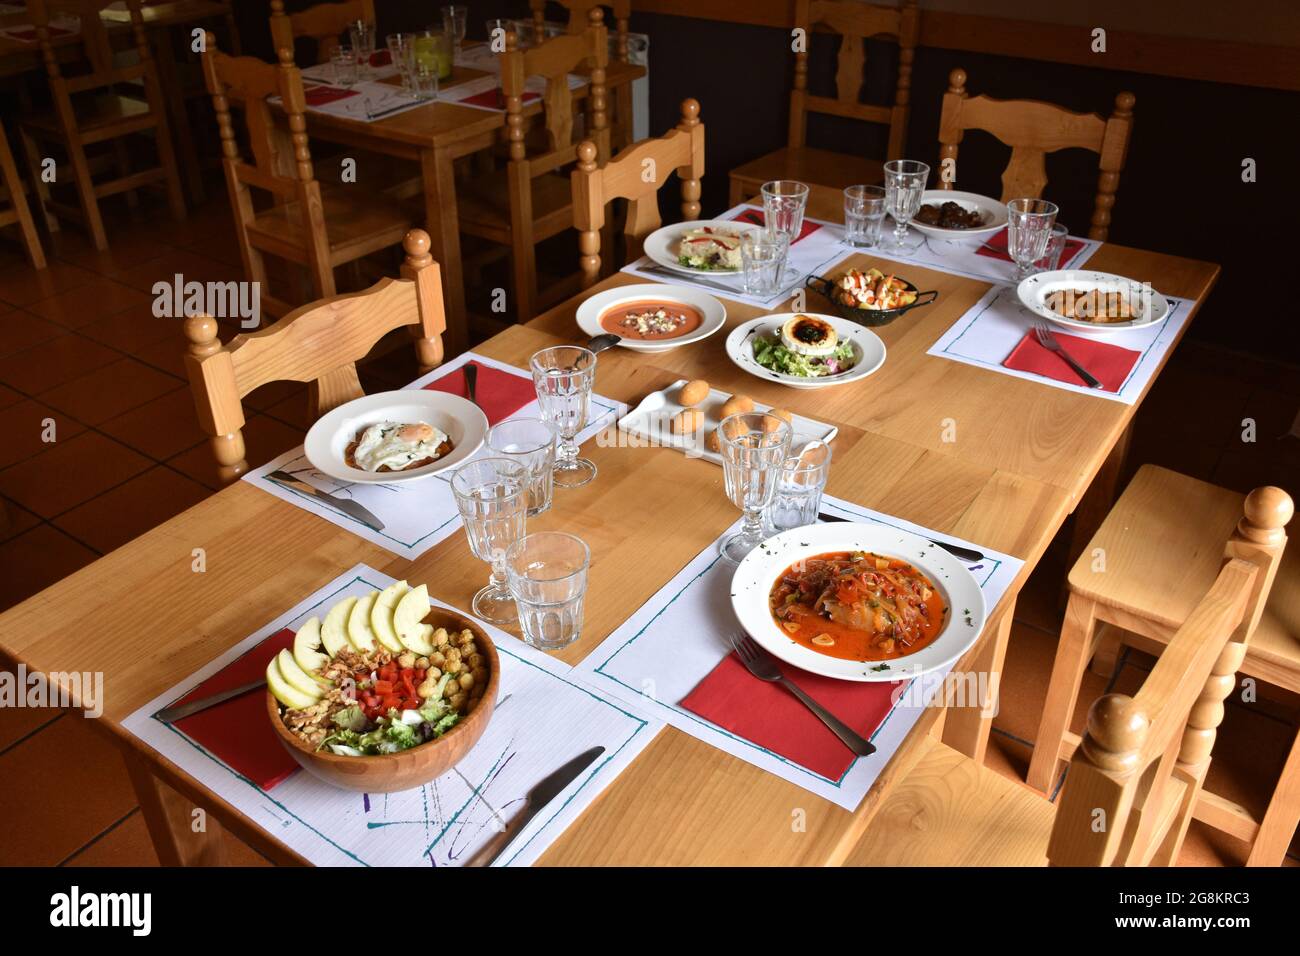 Table in restaurant with different dishes of food served. Wooden tables and chairs, intimate atmosphere without people. Stock Photo